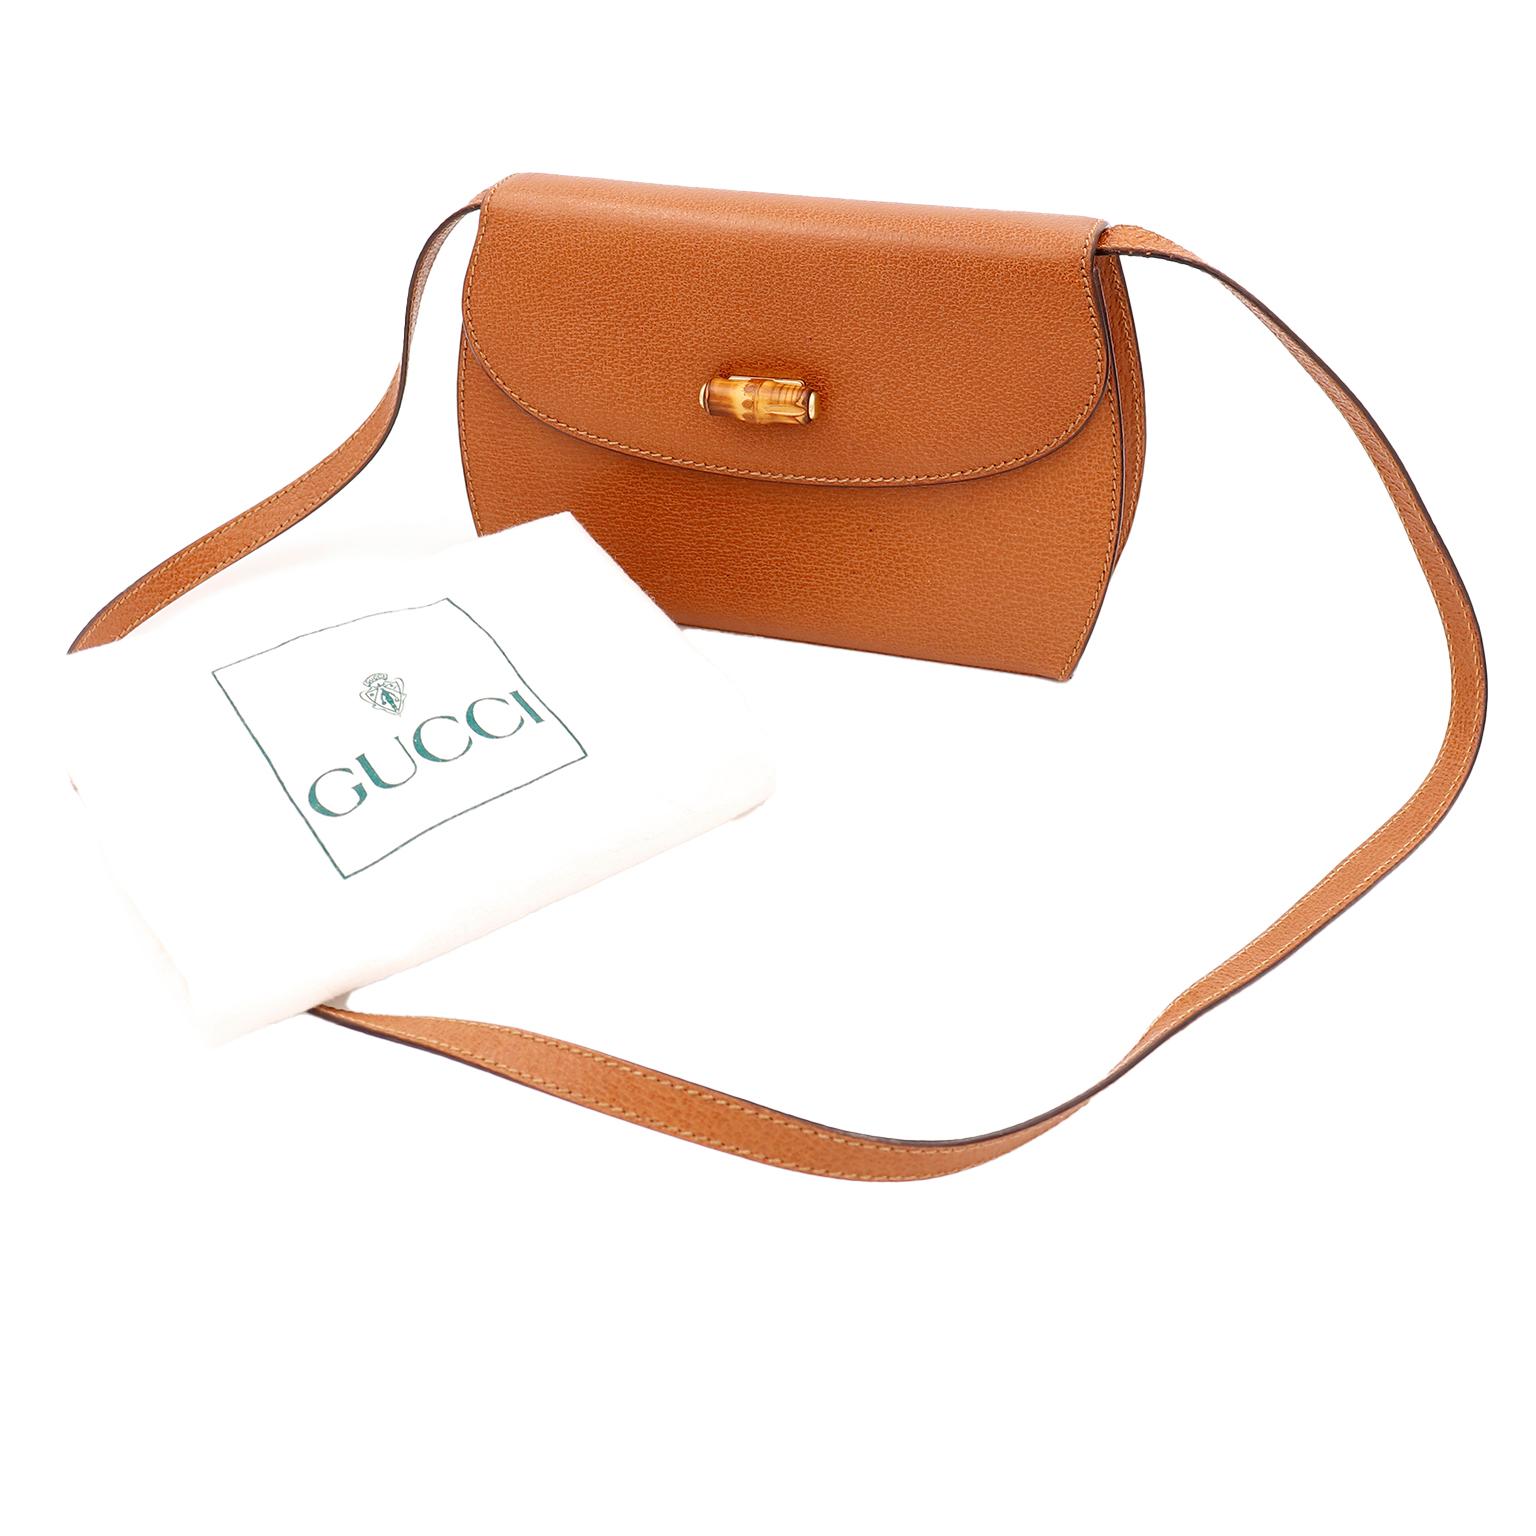 This vintage 1980's Gucci bag was never used and comes with its original dust bag. This pretty light toffee brown pebble Leather handbag can be carried as a clutch if you remove the shoulder strap, or worn crossbody. We love the unique bamboo accent